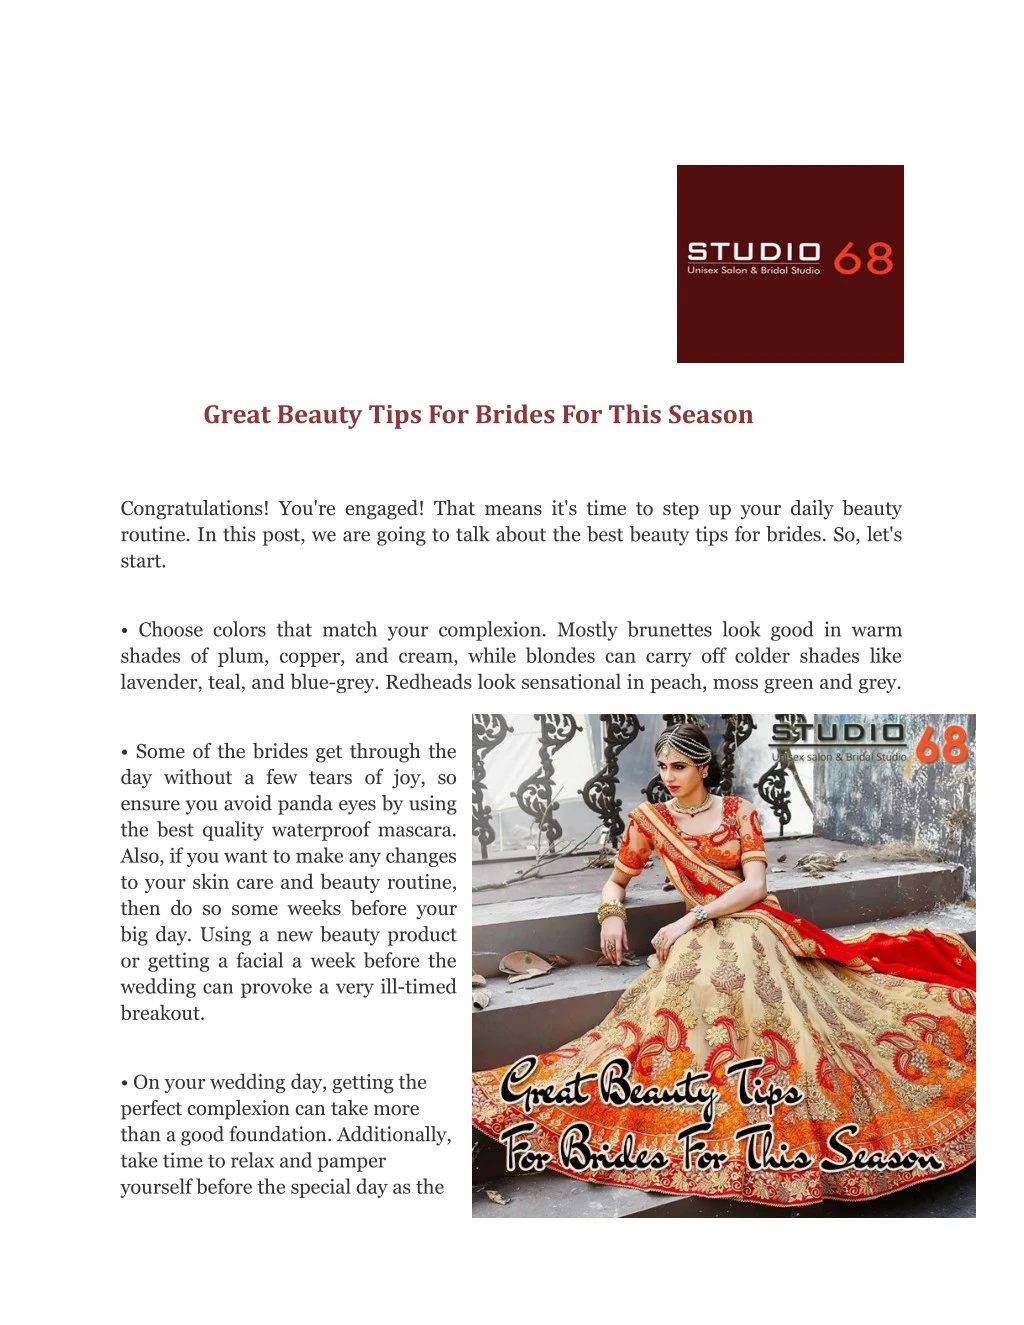 great beauty tips for brides for this season